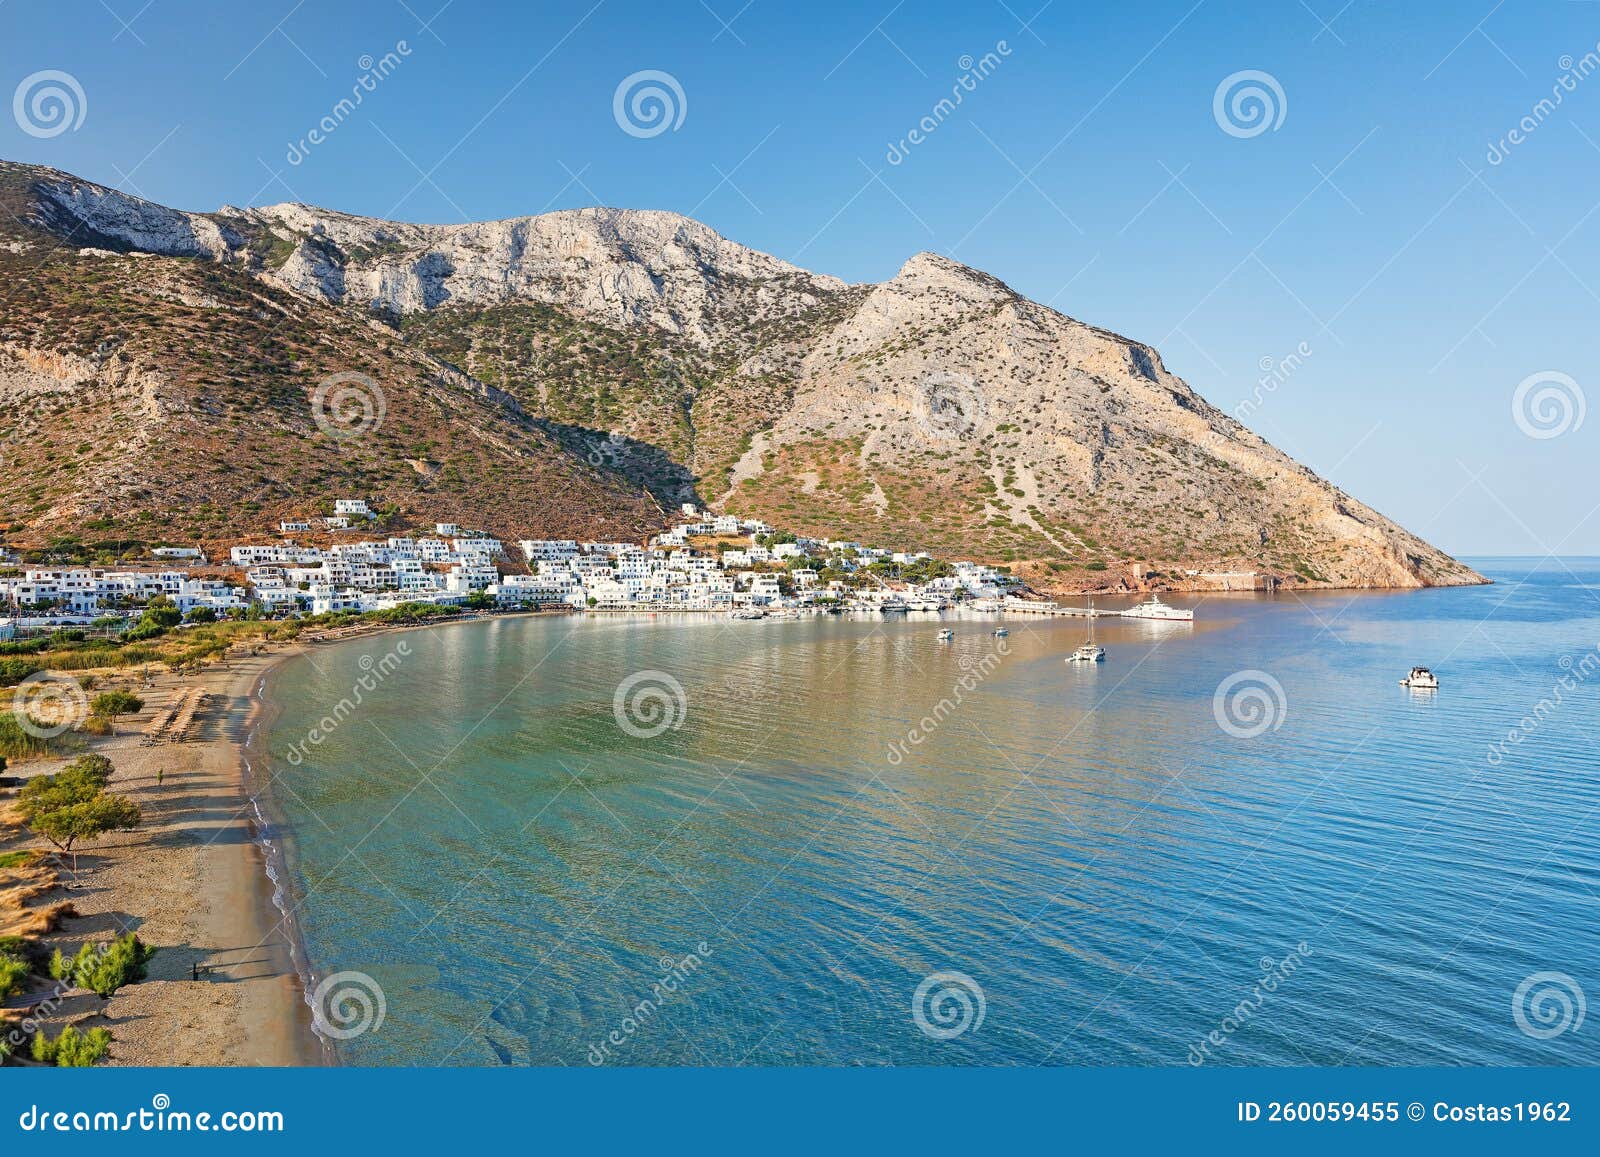 the beach and port kamares of sifnos, greece